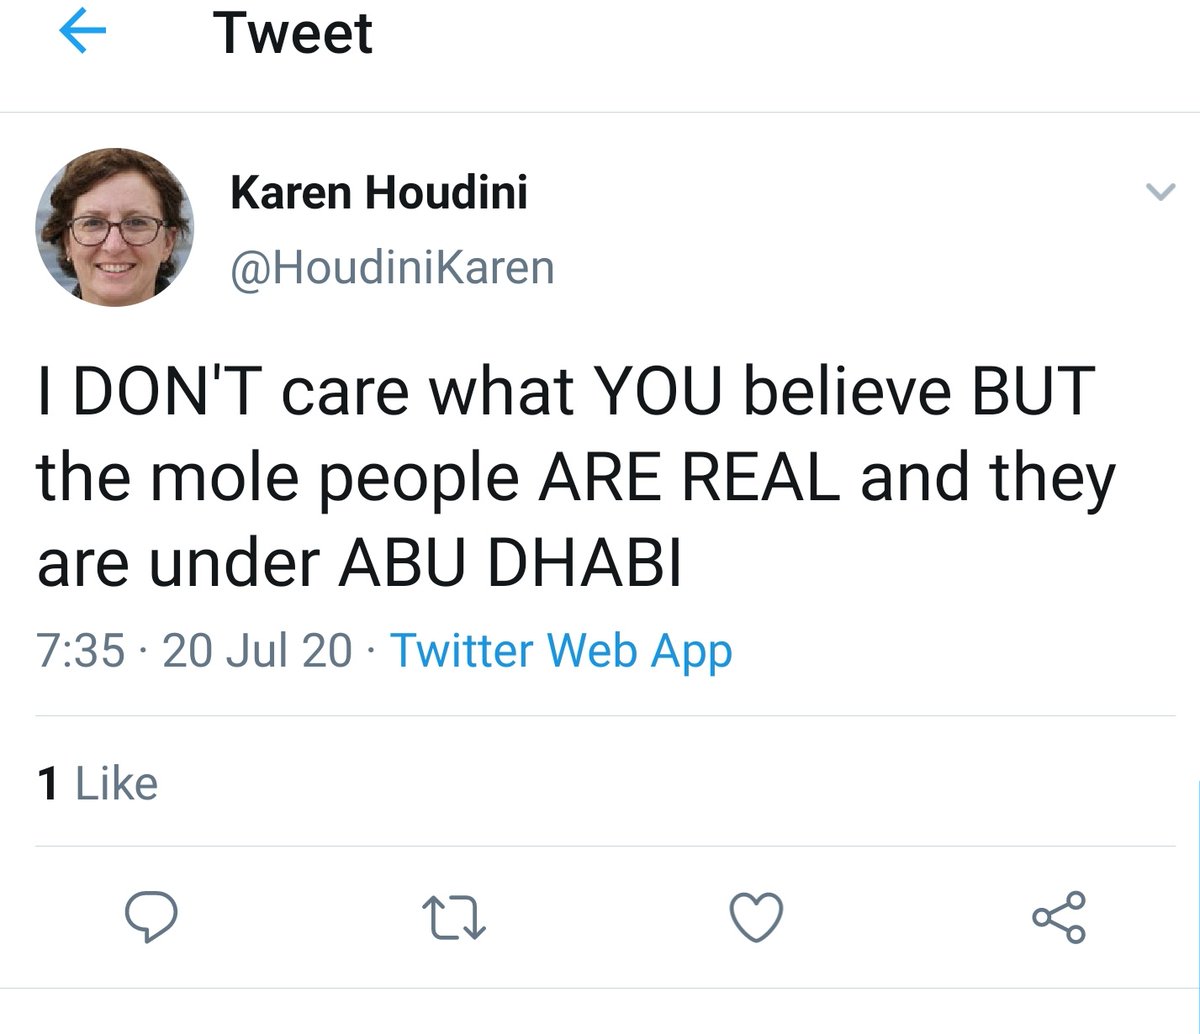 2/2 Also some of the tweets appear purely nonsensical, like this one about parking (erm wth) and one about Abu Dhabi and moles...With the name Karen Houdini one has to wonder if it's a weird gag...